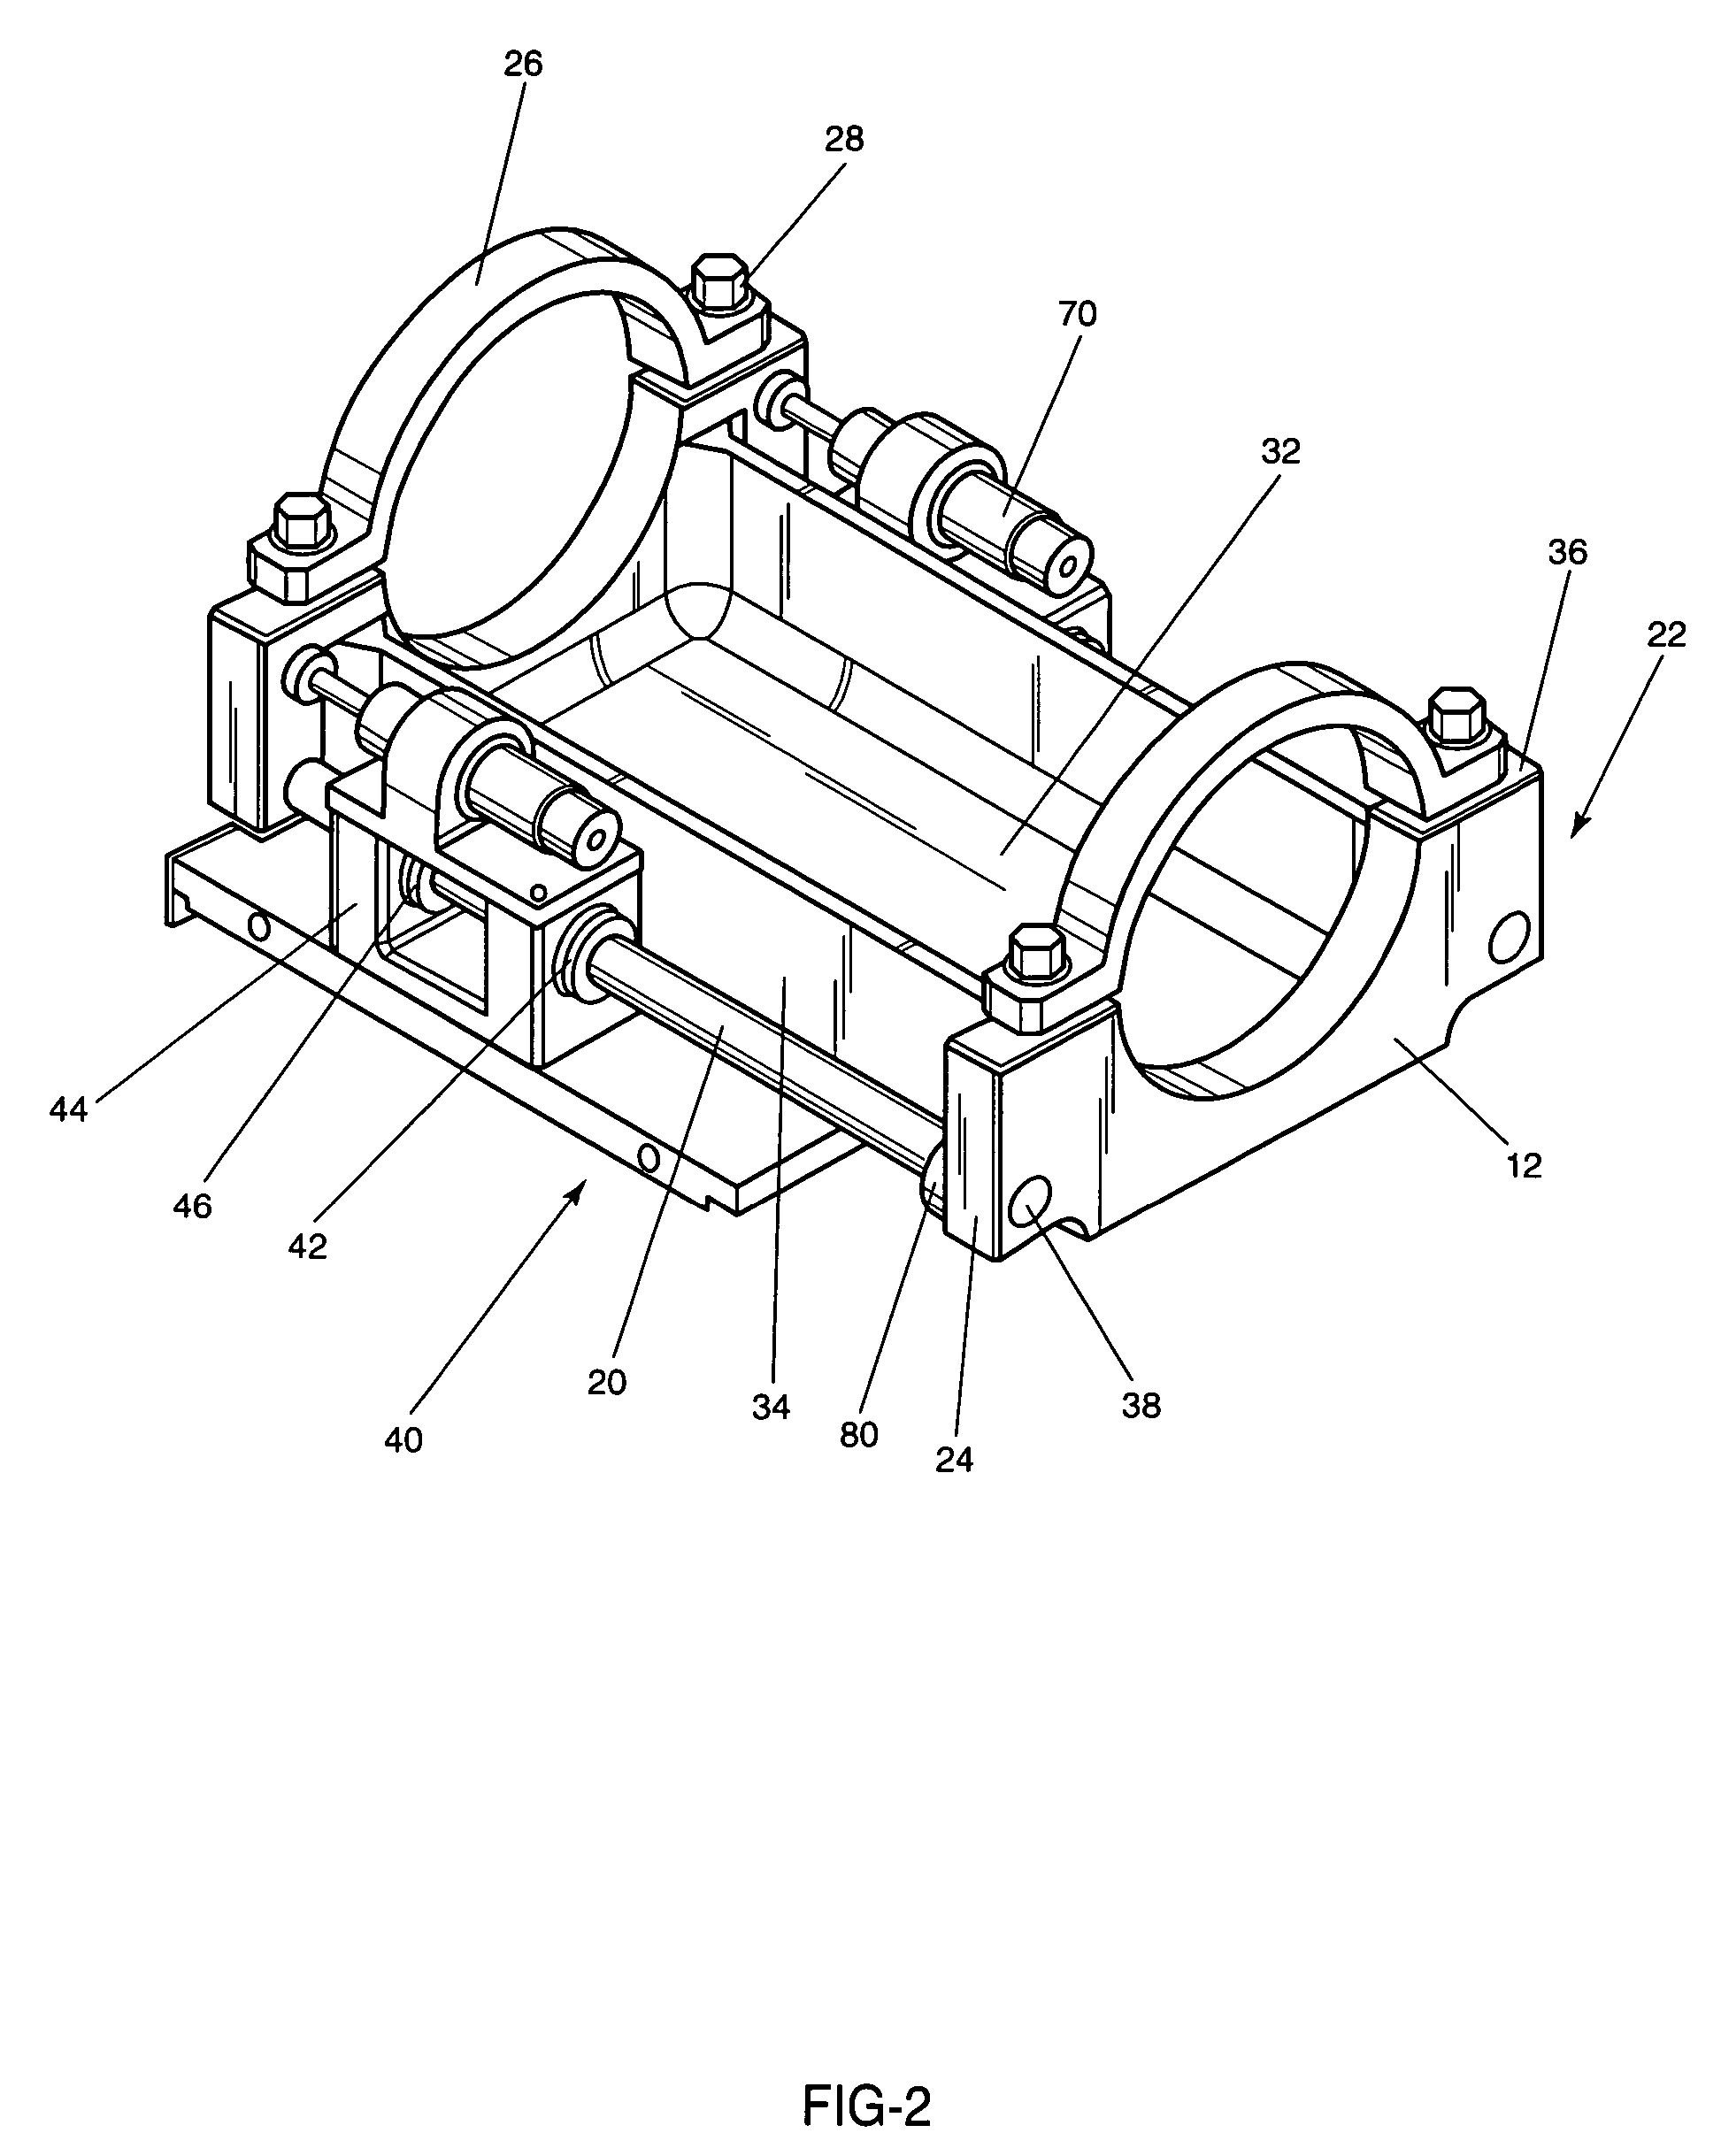 Pointing device inertial isolation and alignment mounting system